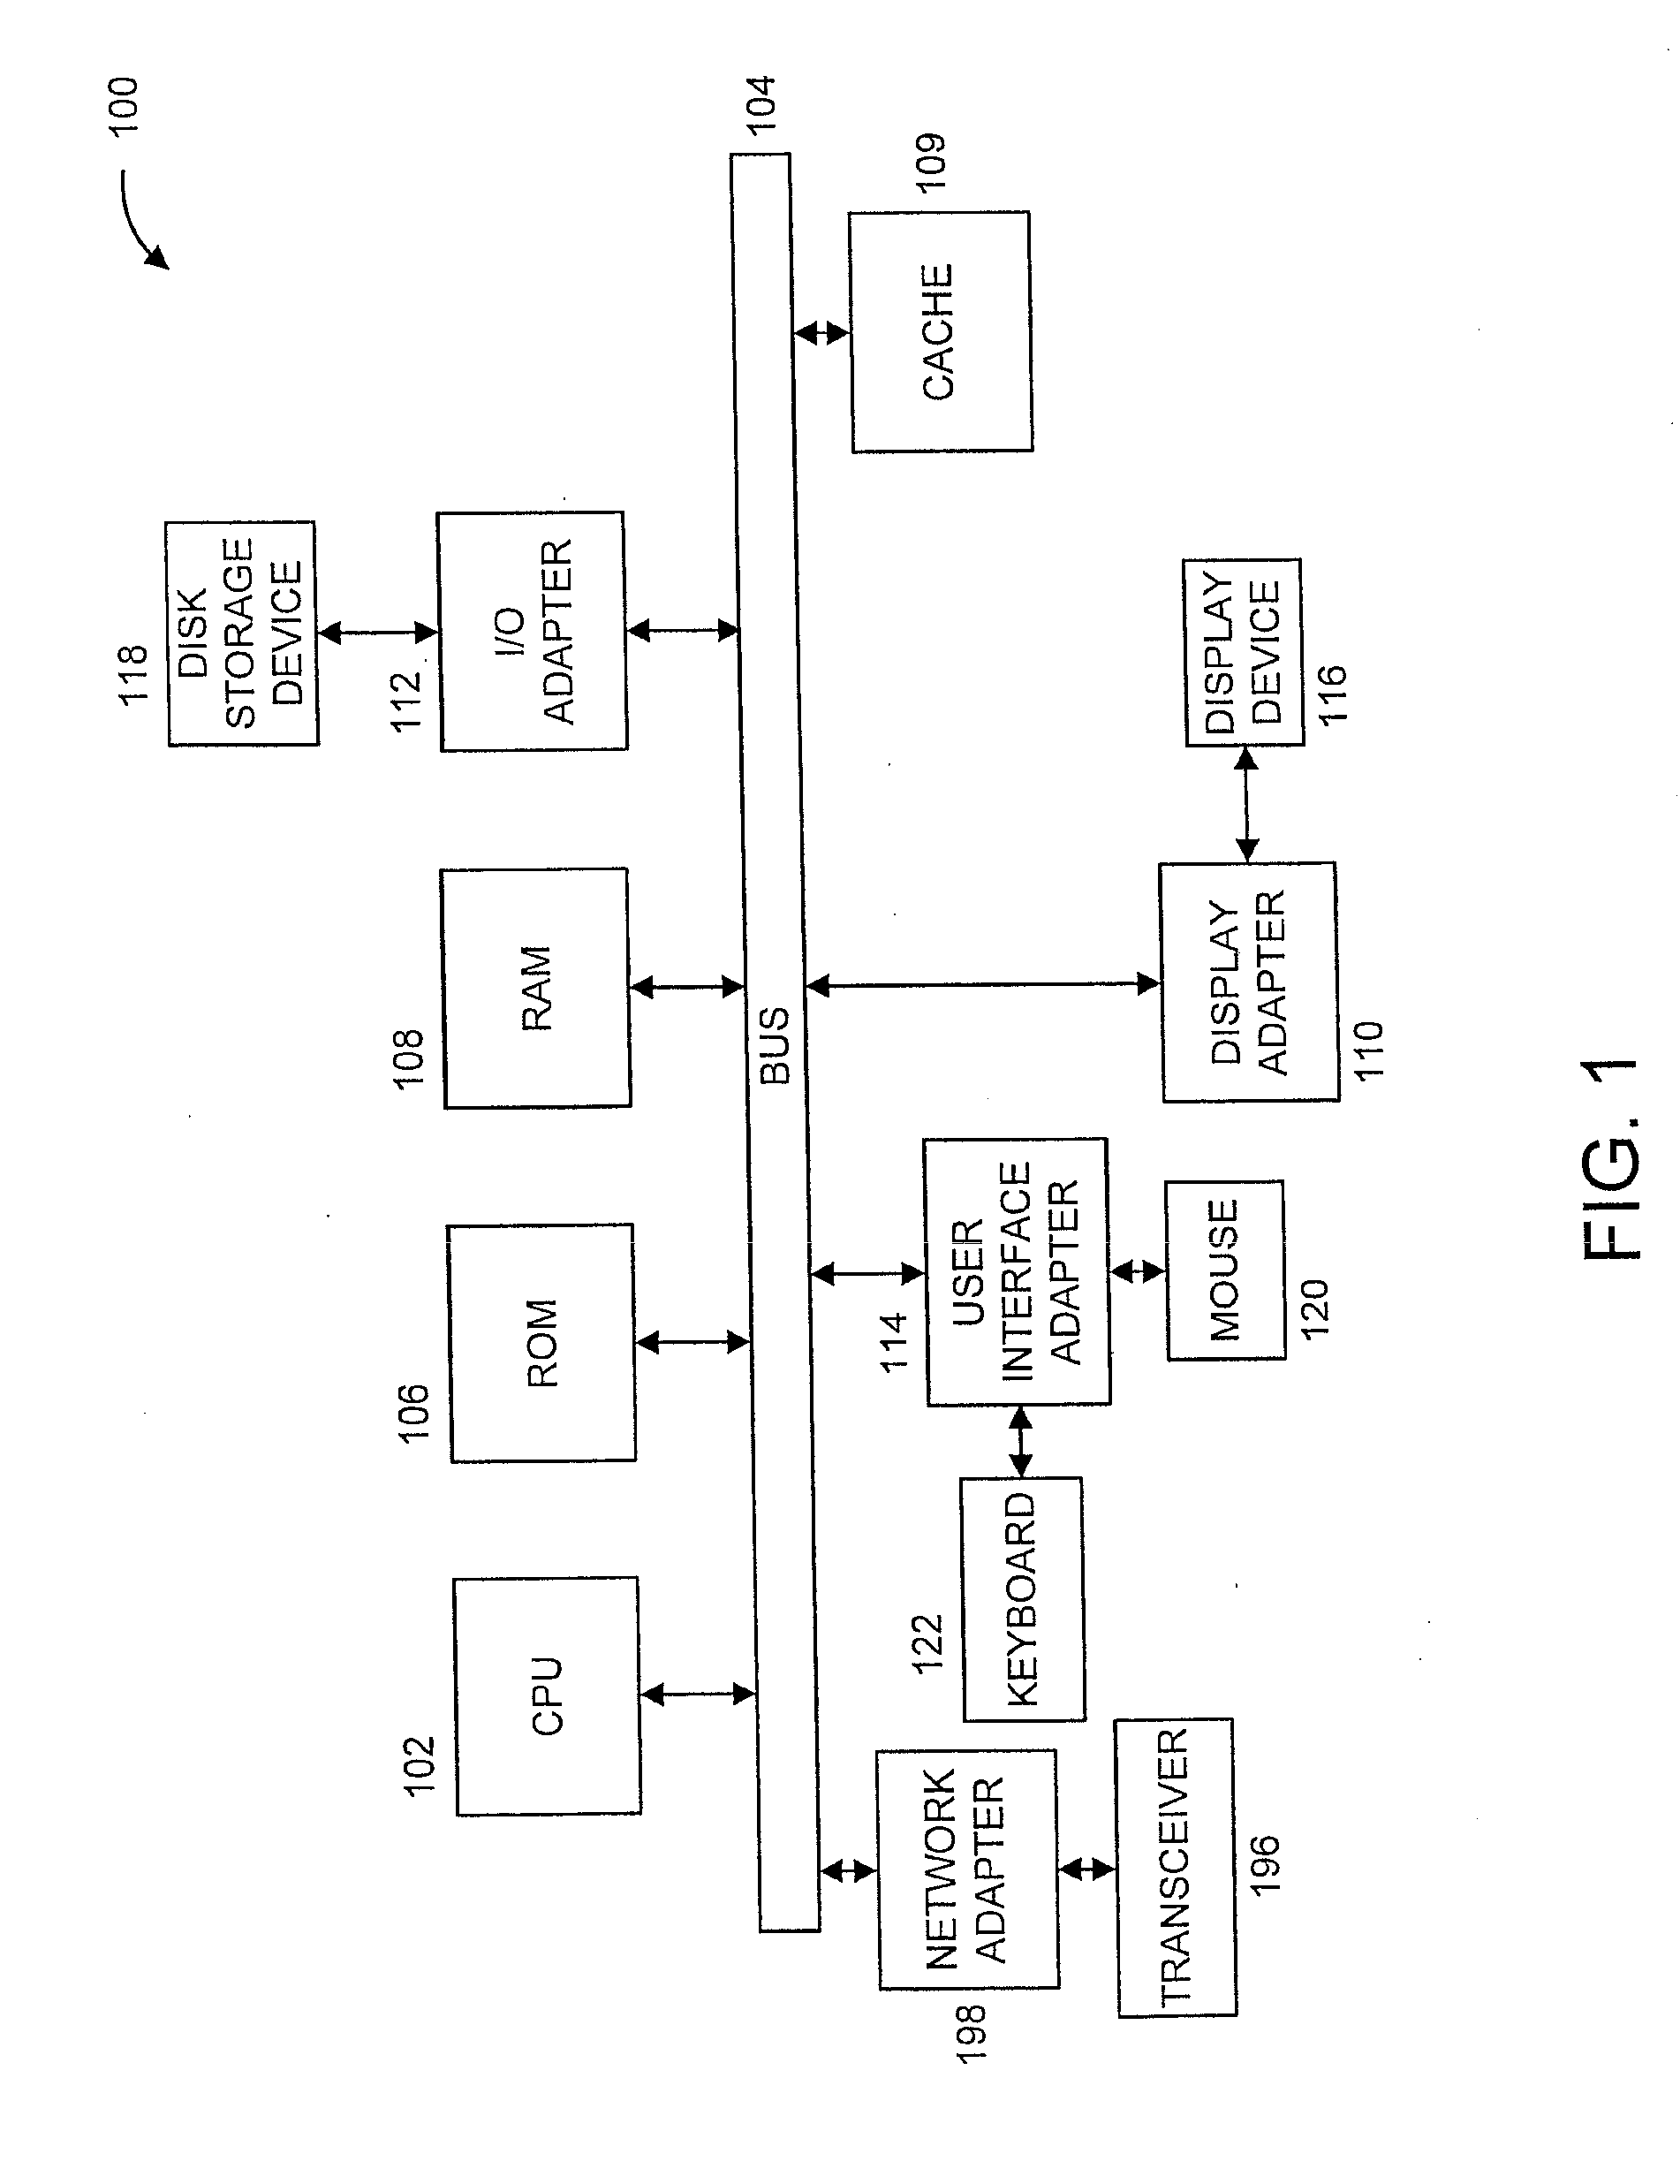 Linking graphical user interface testing tools and human performance modeling to enable usability assessment